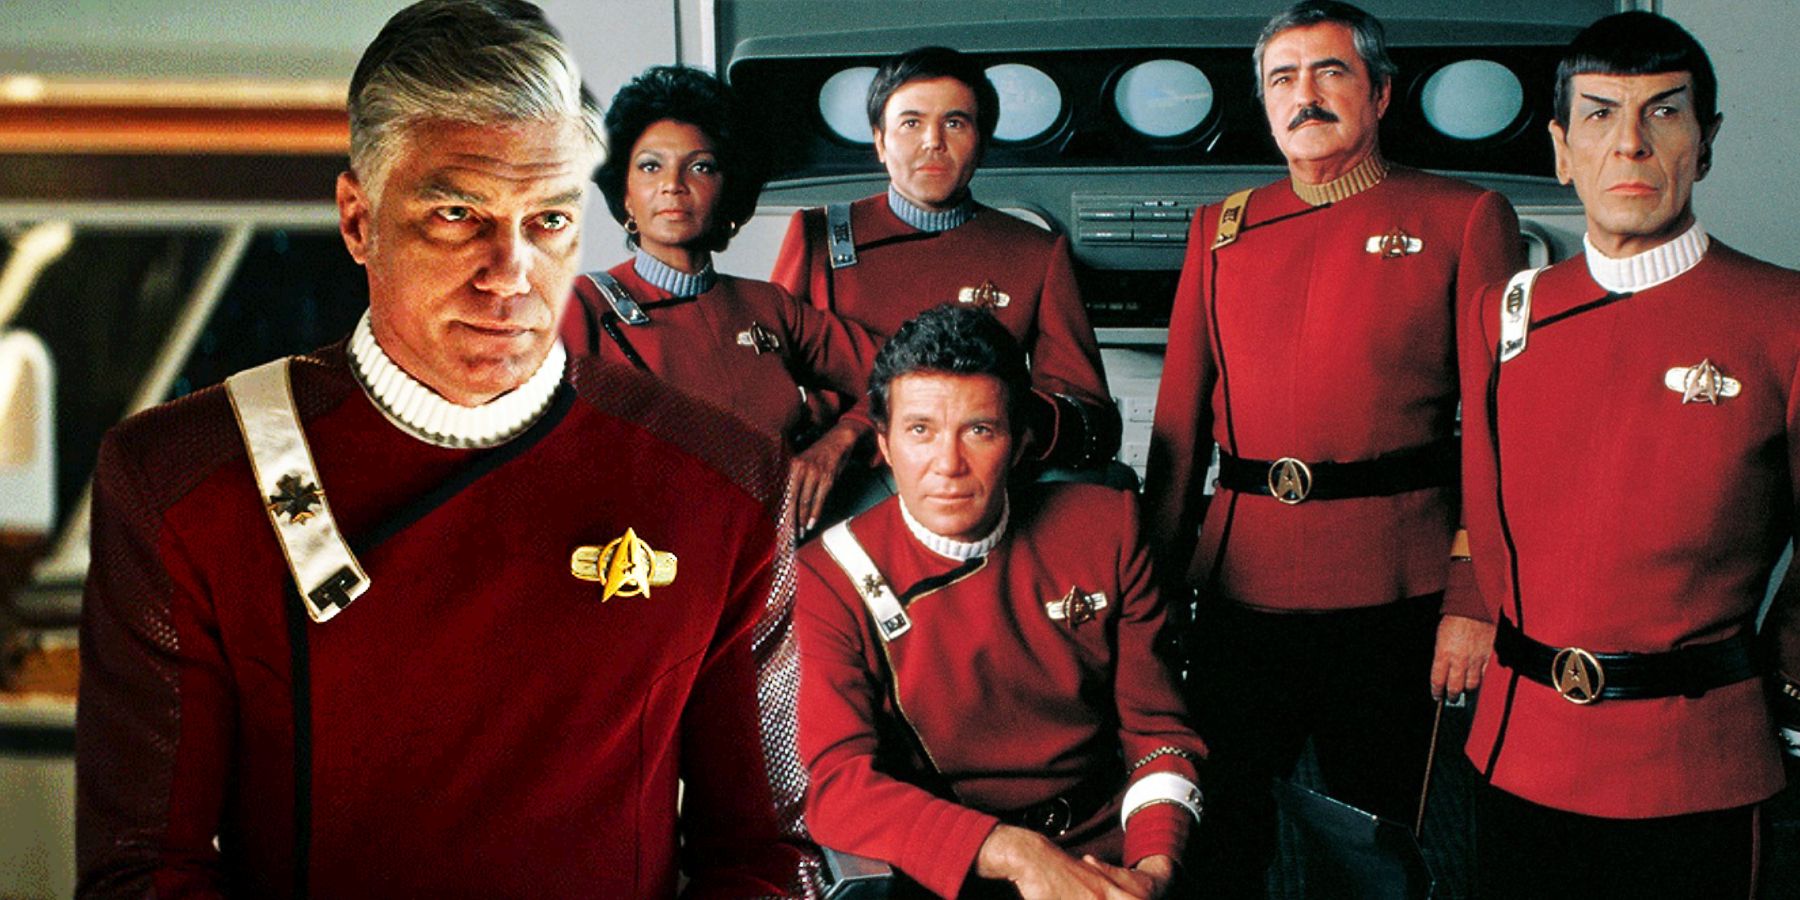 Star Trek’s Starfleet Uniform Colors: What They Mean & Why They Changed